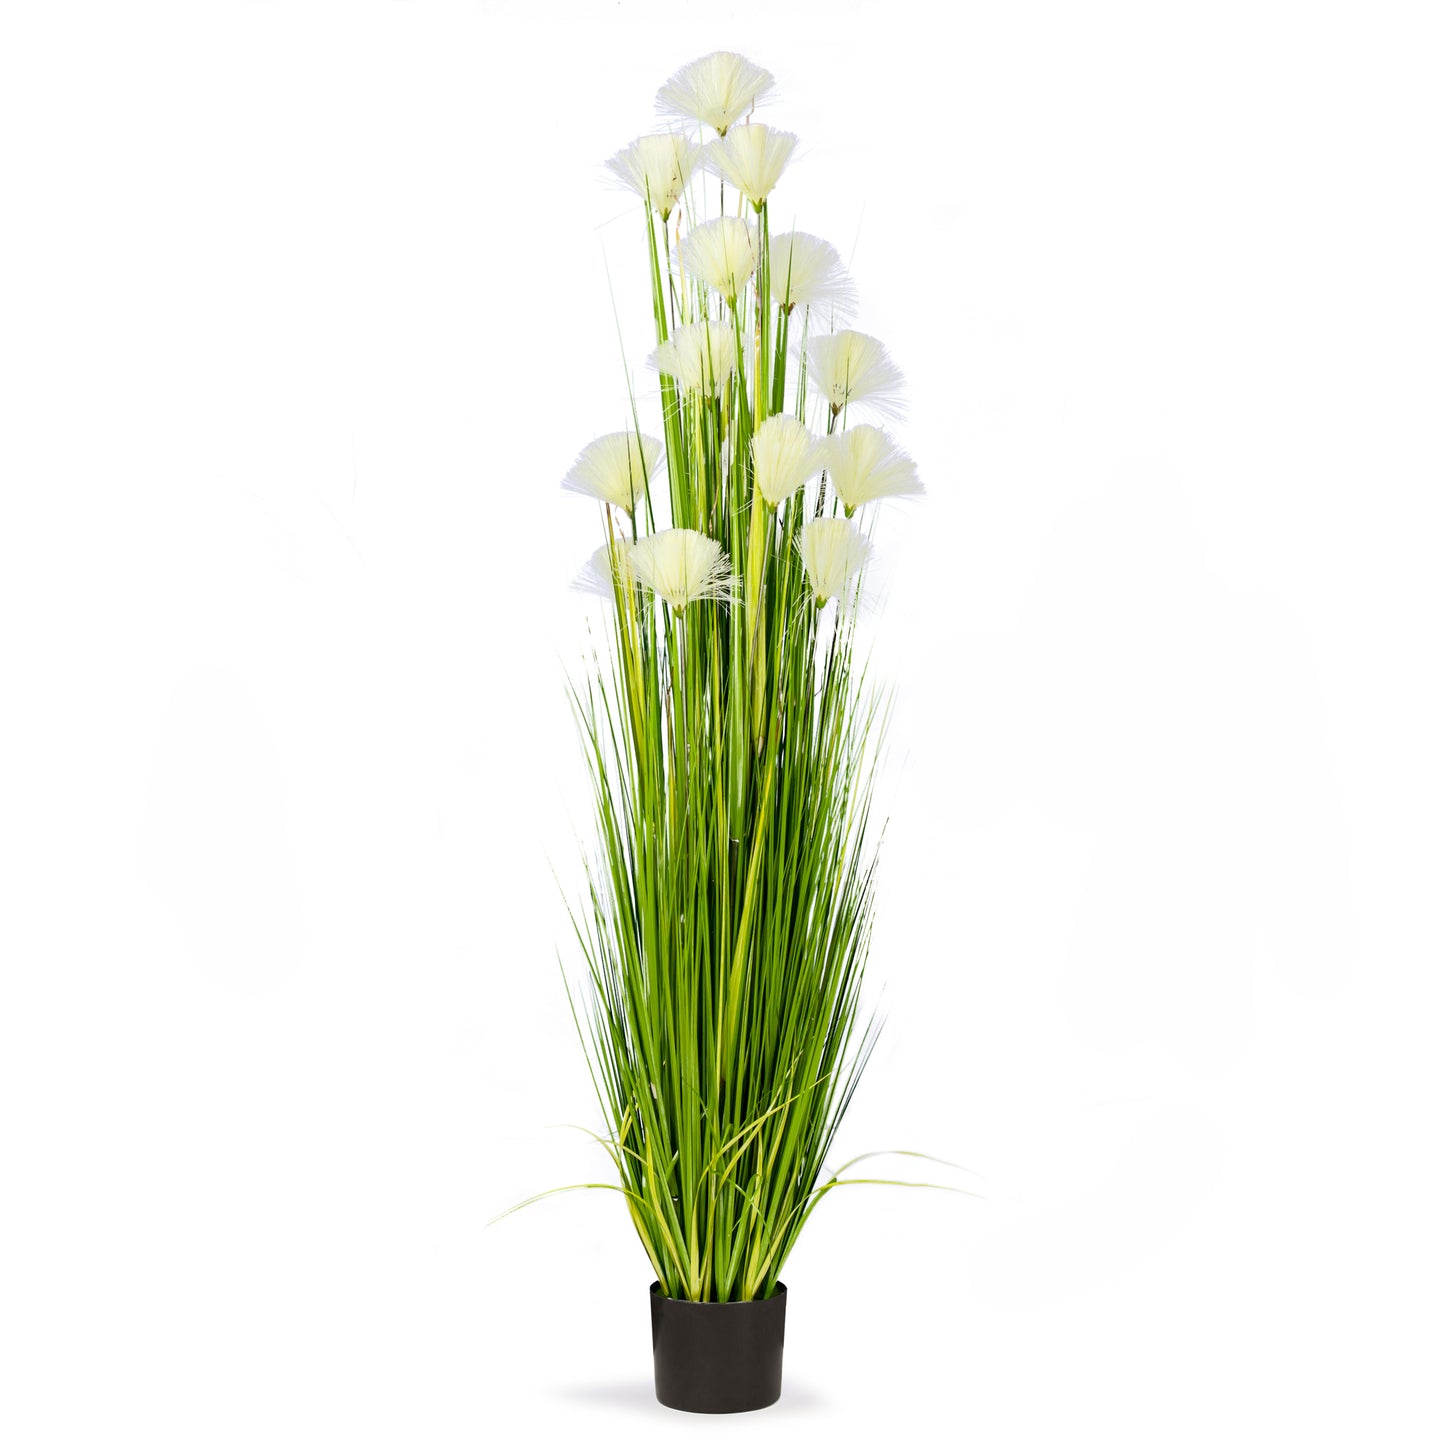 6 Feet High Artificial Reed Grass with Decorative Ivory Flowers